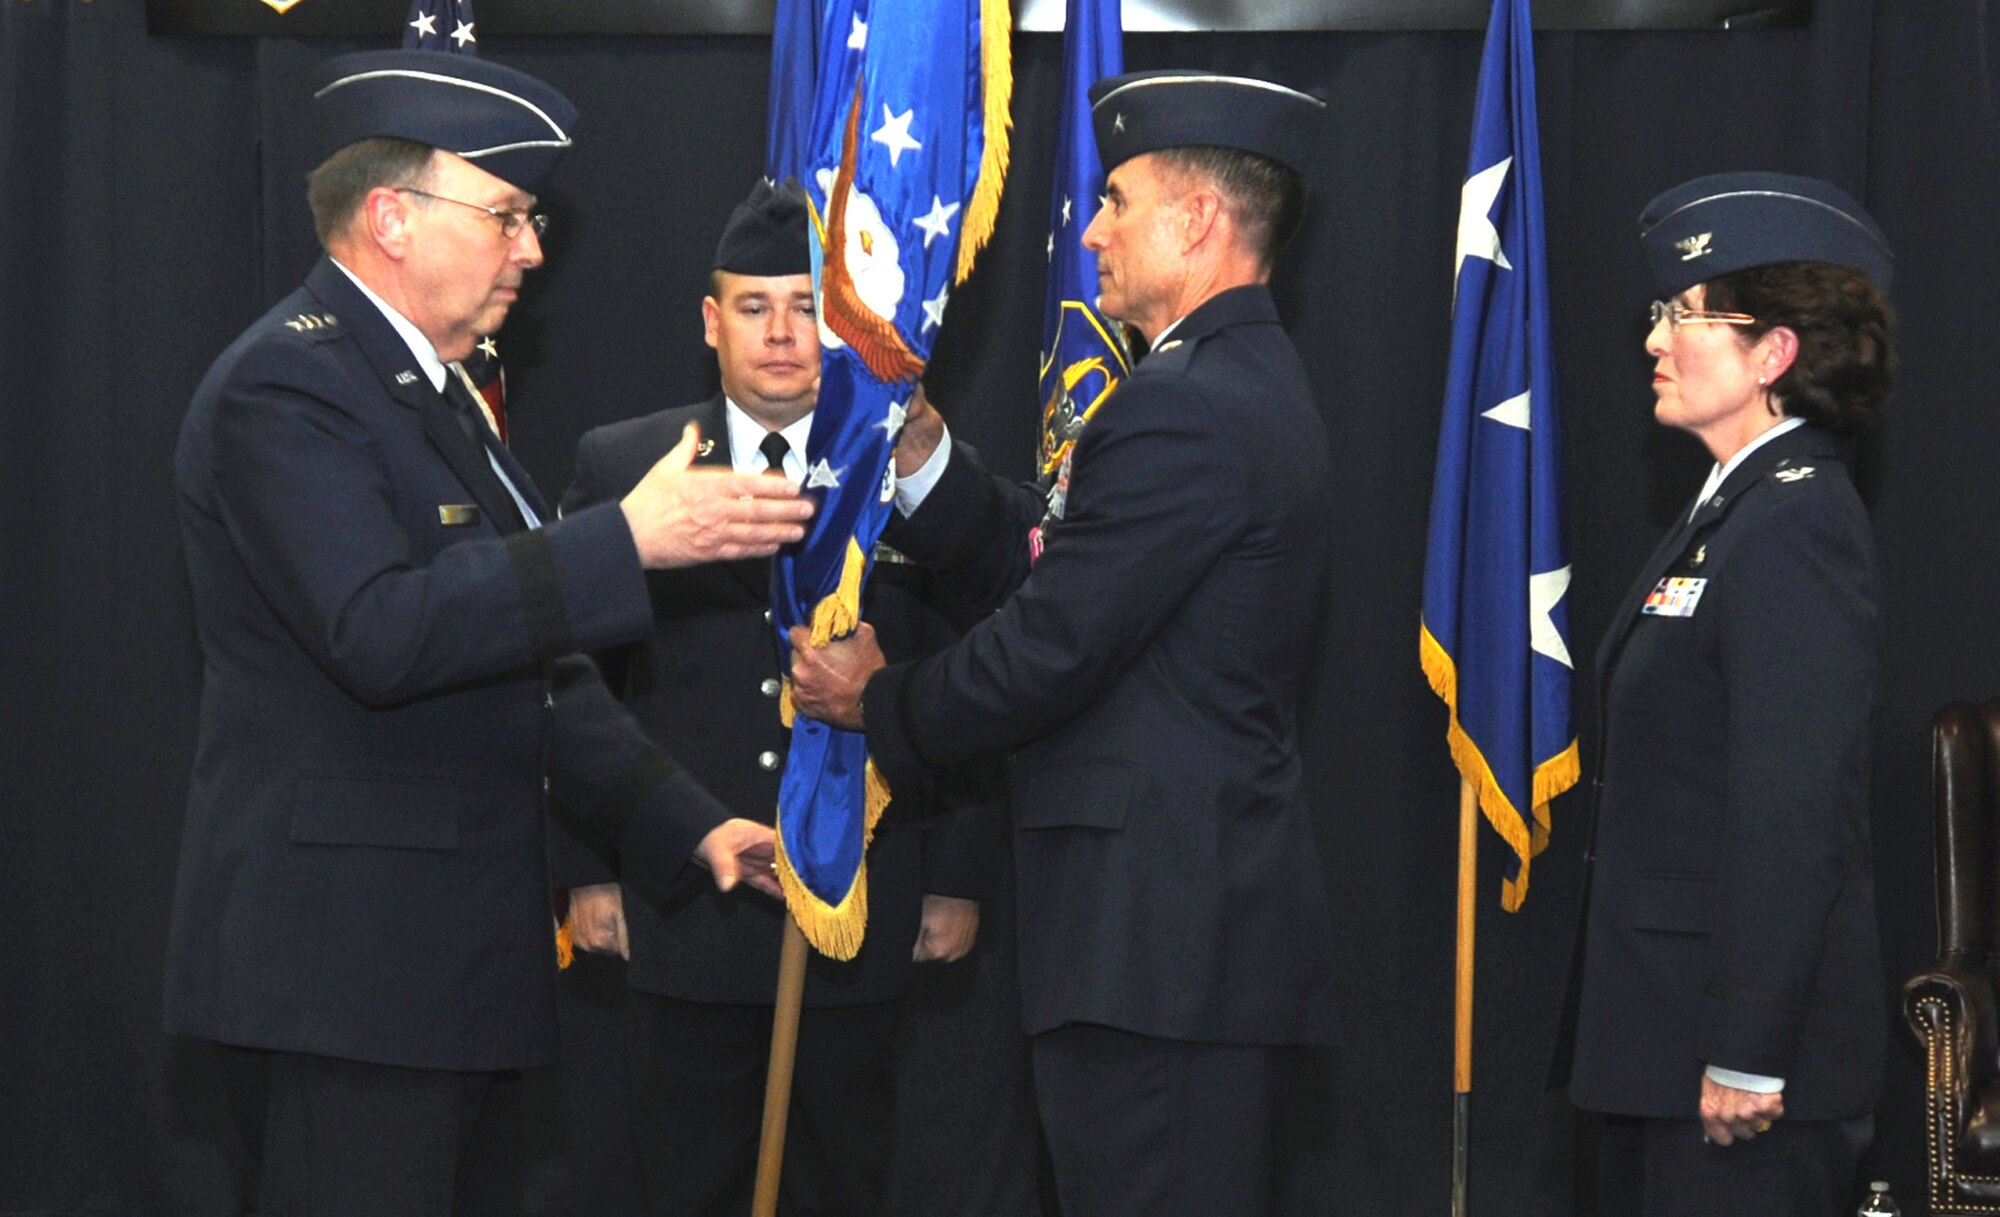 From left: Lt. Gen. Charles E. Stenner, Jr., commander of Air Force Reserve Command, accepts the Air Reserve Personnel Center flag from Brig. Gen. Kevin E. Pottinger, who relinquished command of the center to Col. Patricia Blassie Nov. 29, 2010, in Denver. Colonel Blassie was the executive officer to the Chief of the Air Force Reserve before assuming command at ARPC. General Pottinger will become the mobilization assistant to the Assistant Secretary of the Air Force for Manpower and Reserve Affairs in the Pentagon. (U.S. Air Force photo/Kevin Bell) 